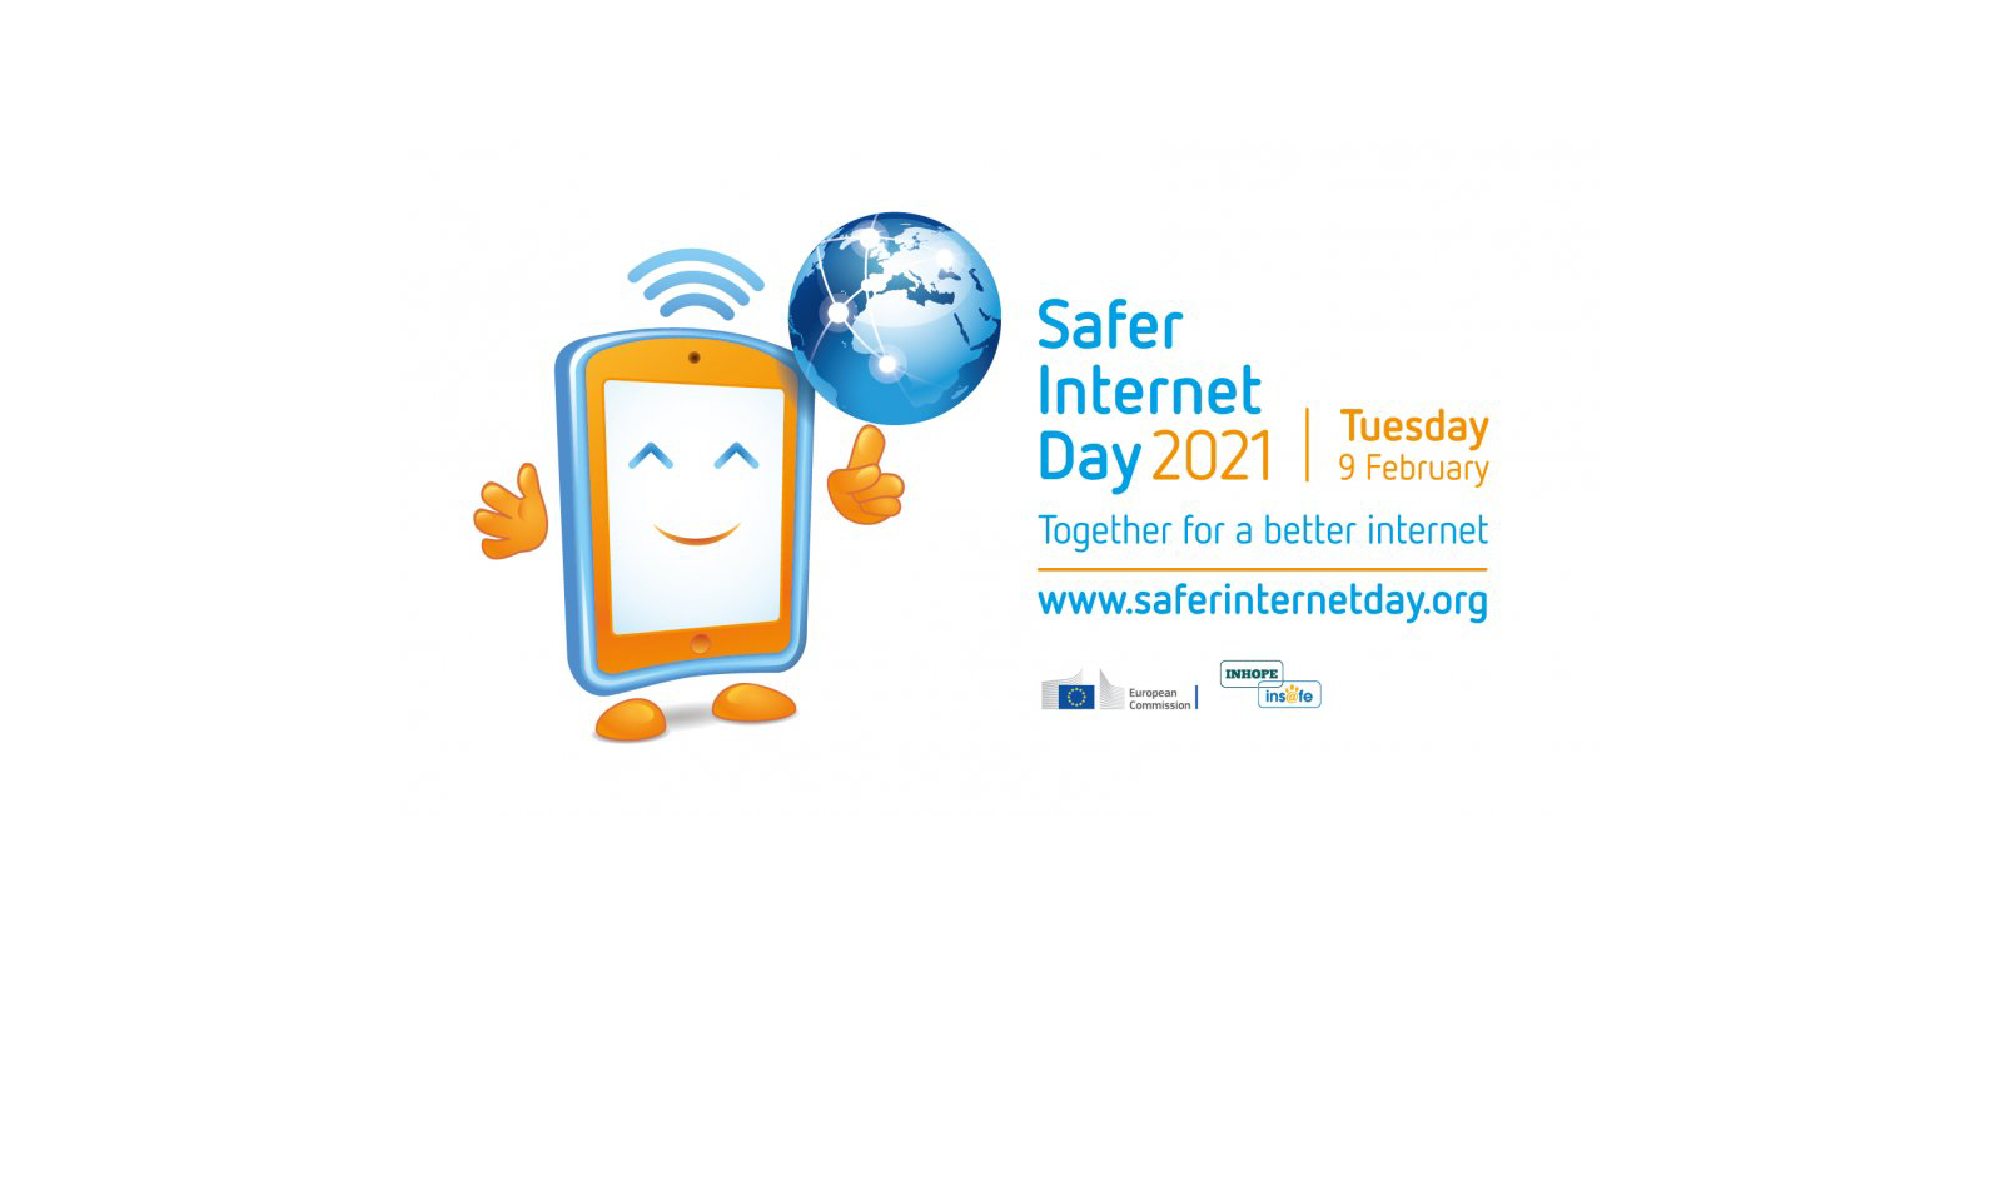 Helping to protect kids this Safer Internet Day and beyond